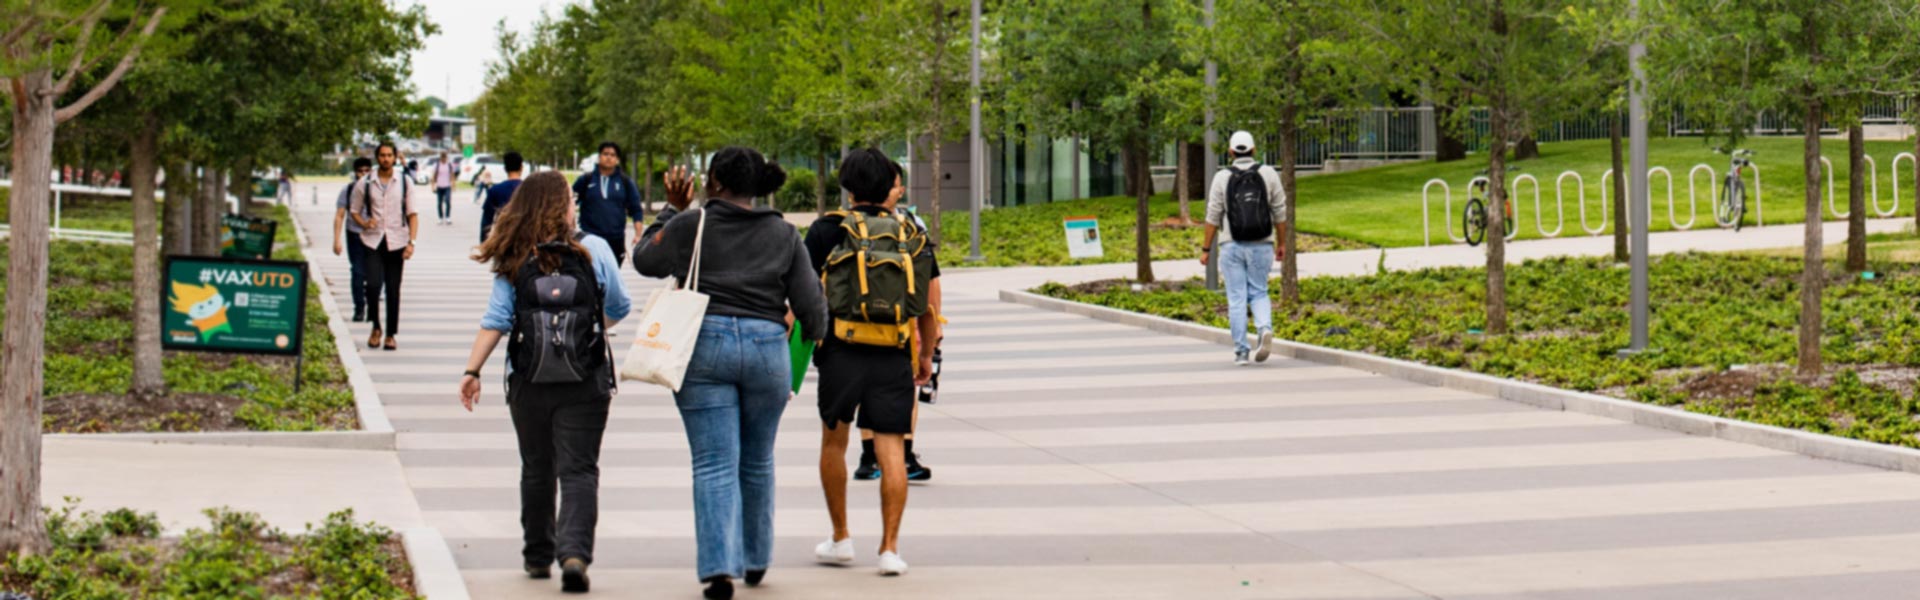 University of Texas at Dallas students walking to class on campus.